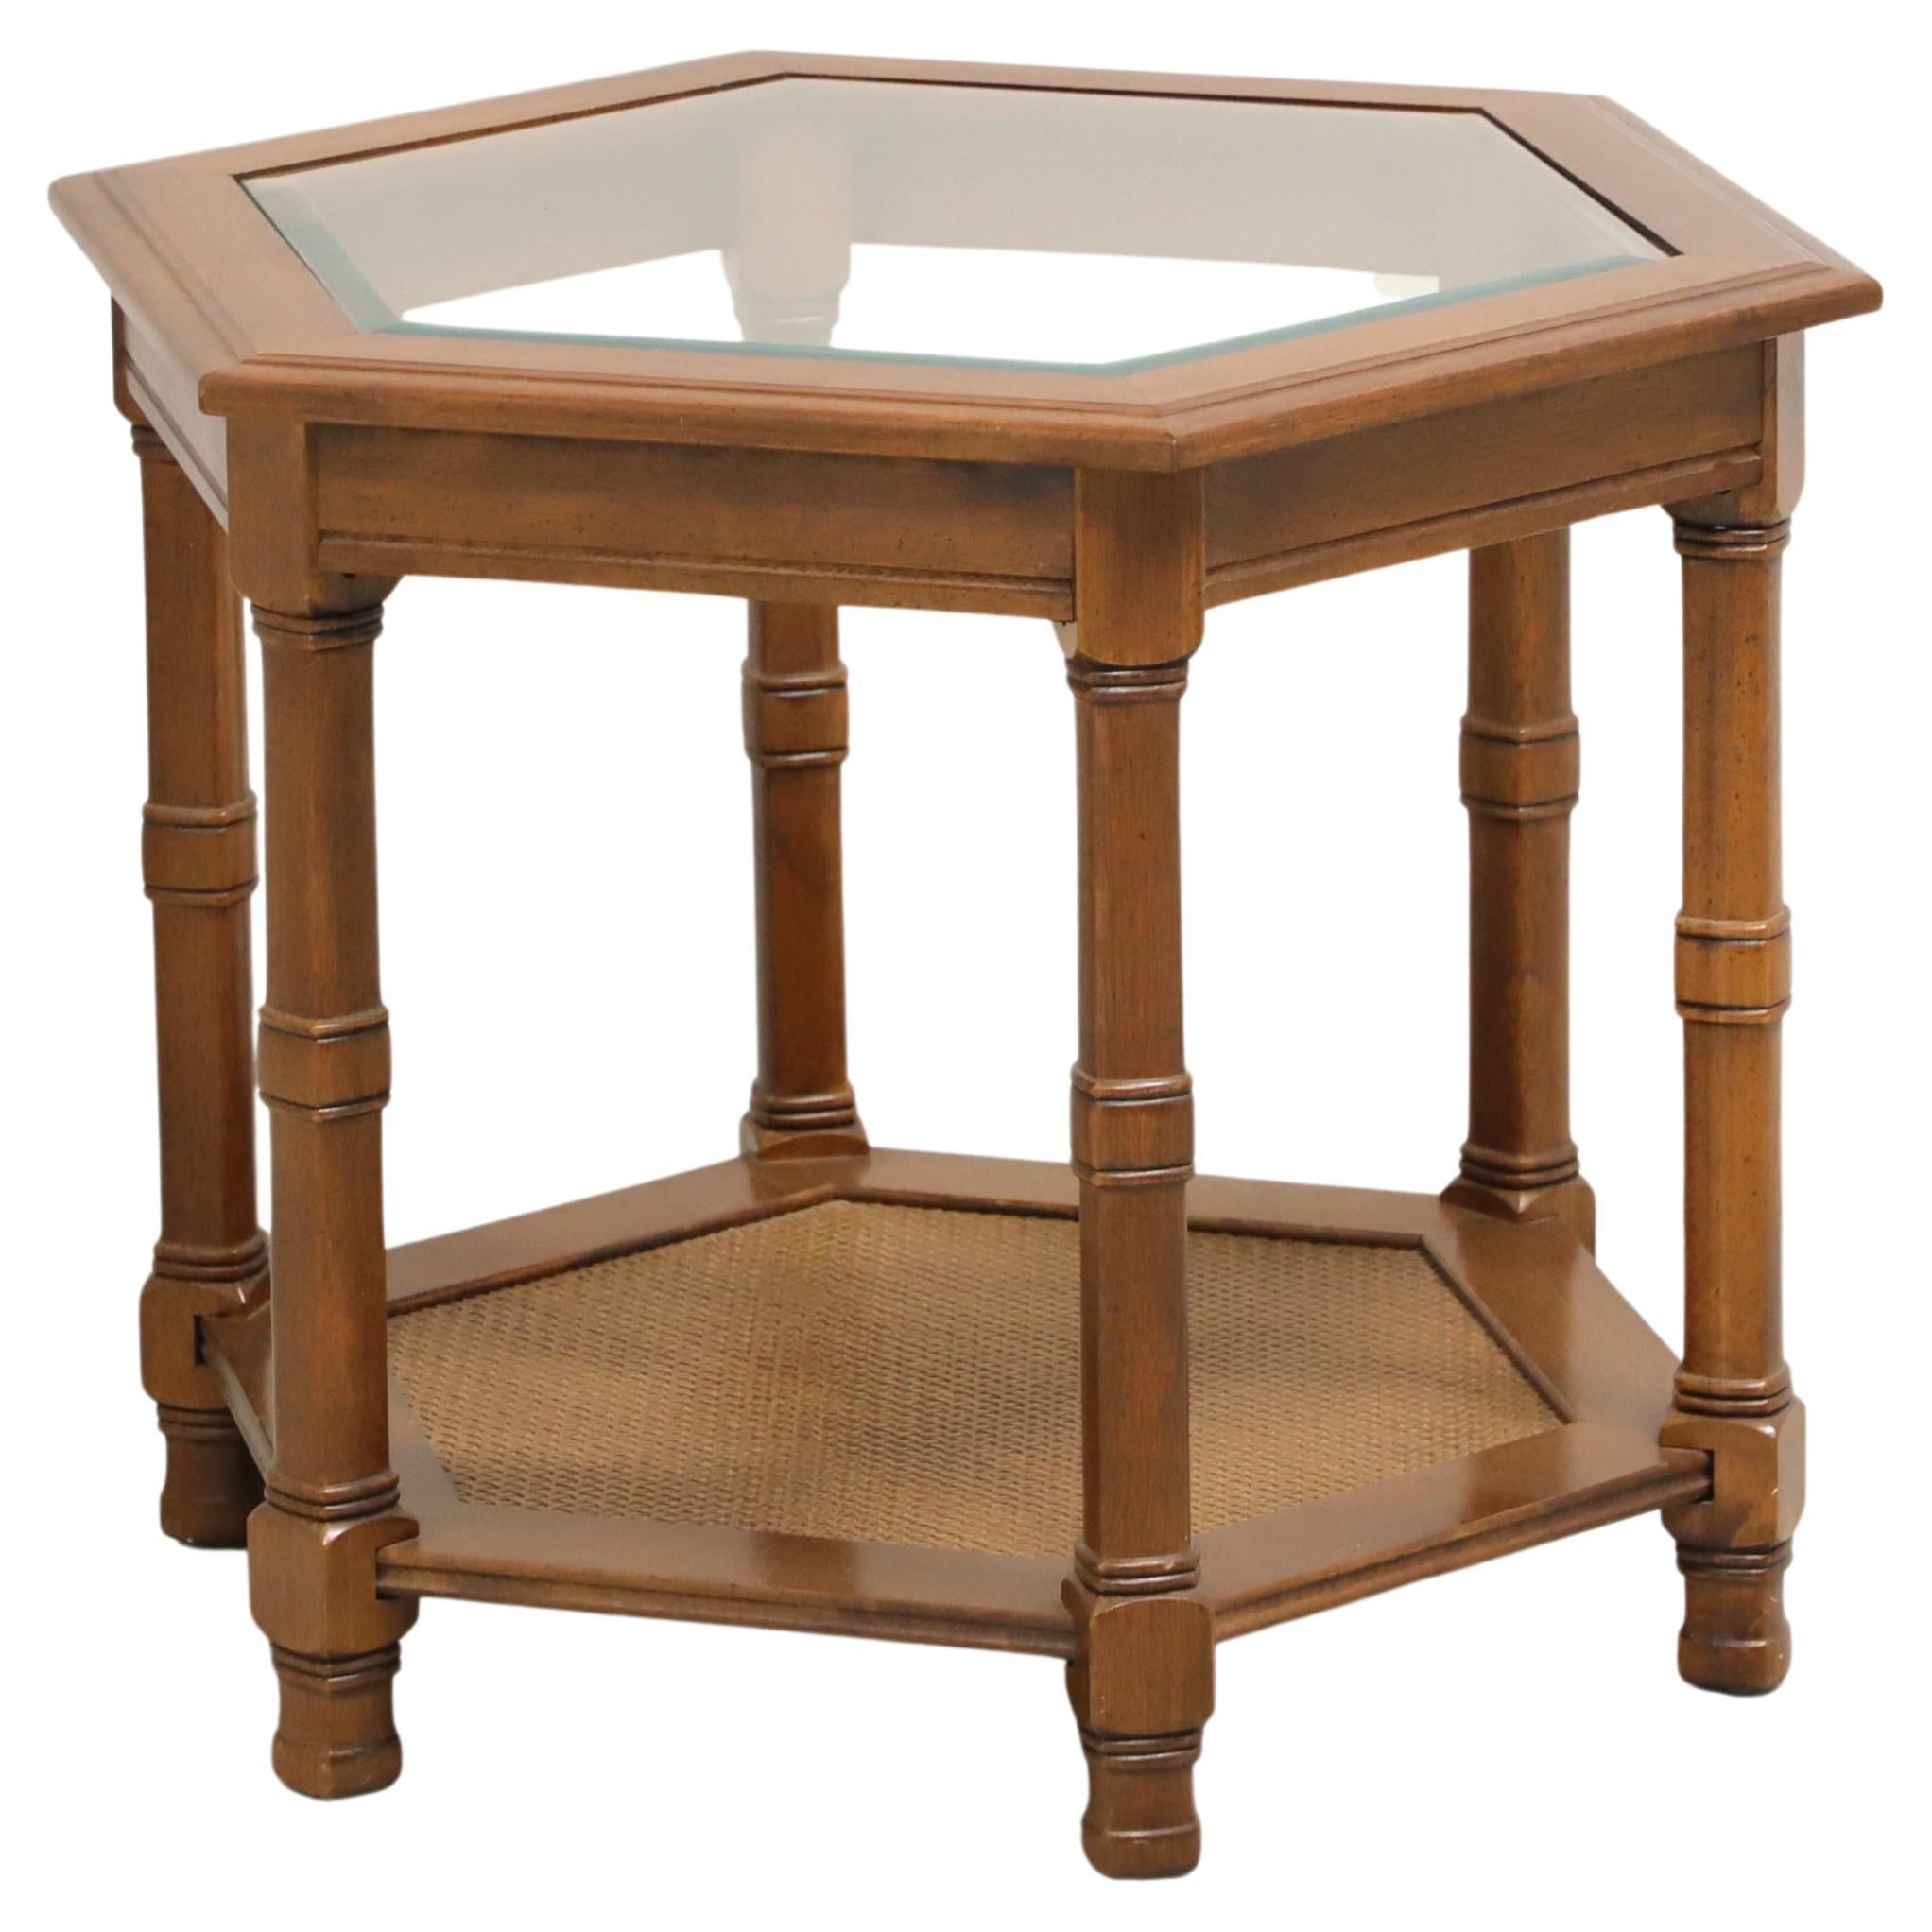 Mid 20th Century Walnut Hexagonal Glass Top Accent Table with Caned Shelf For Sale